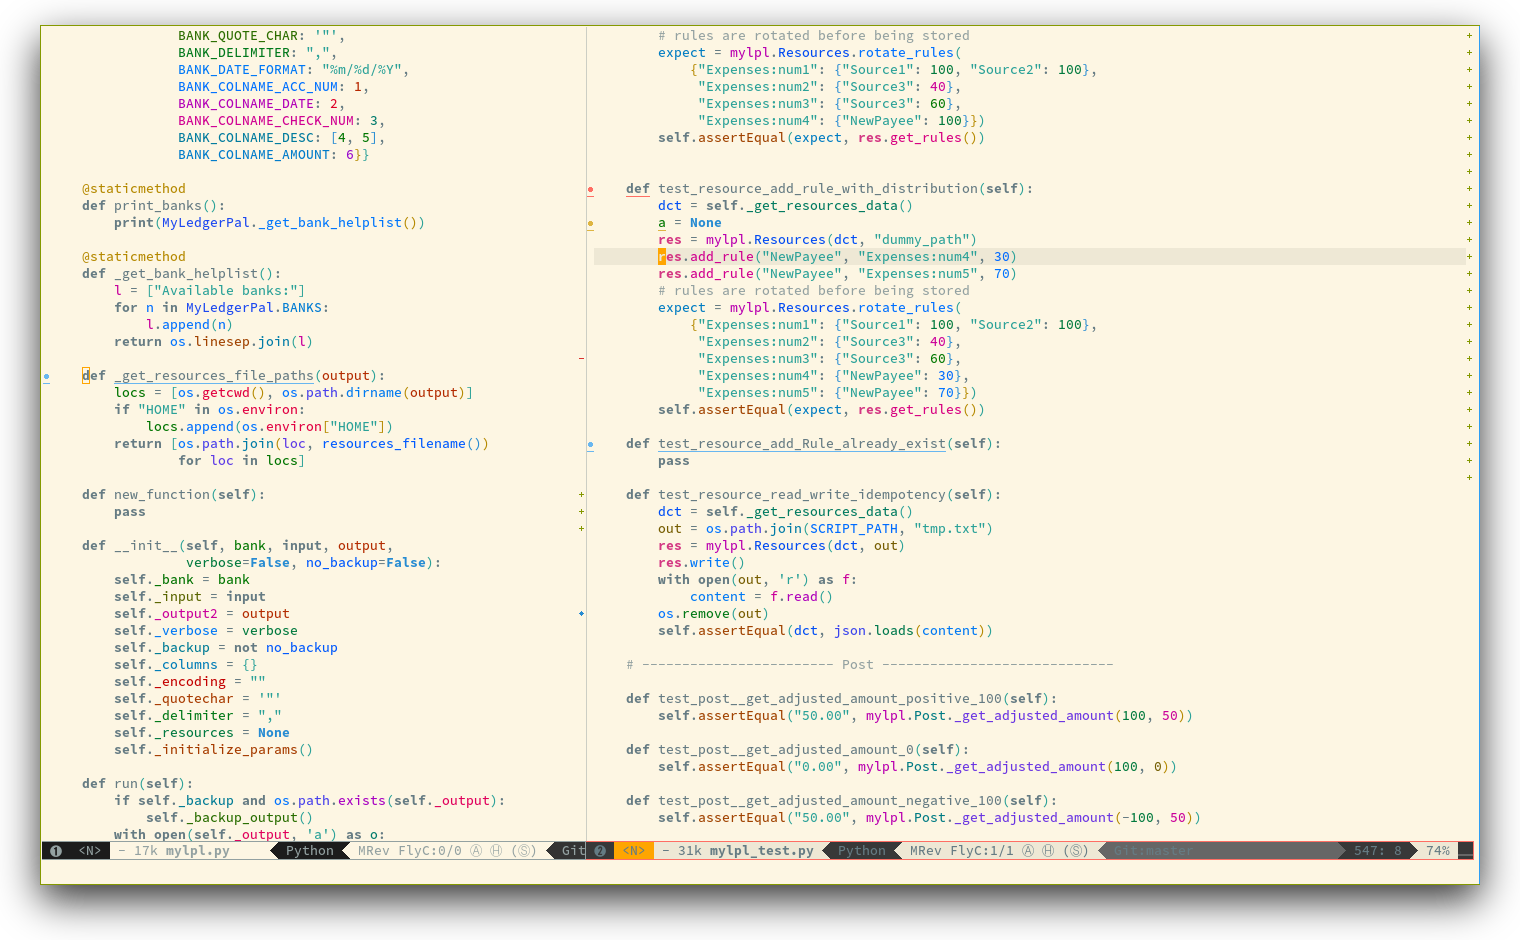 /TakeV/spacemacs/media/commit/edd7a501c8950d9defe36451964790780b2c9d66/layers/+themes/colors/img/theme-tweaks-python.png